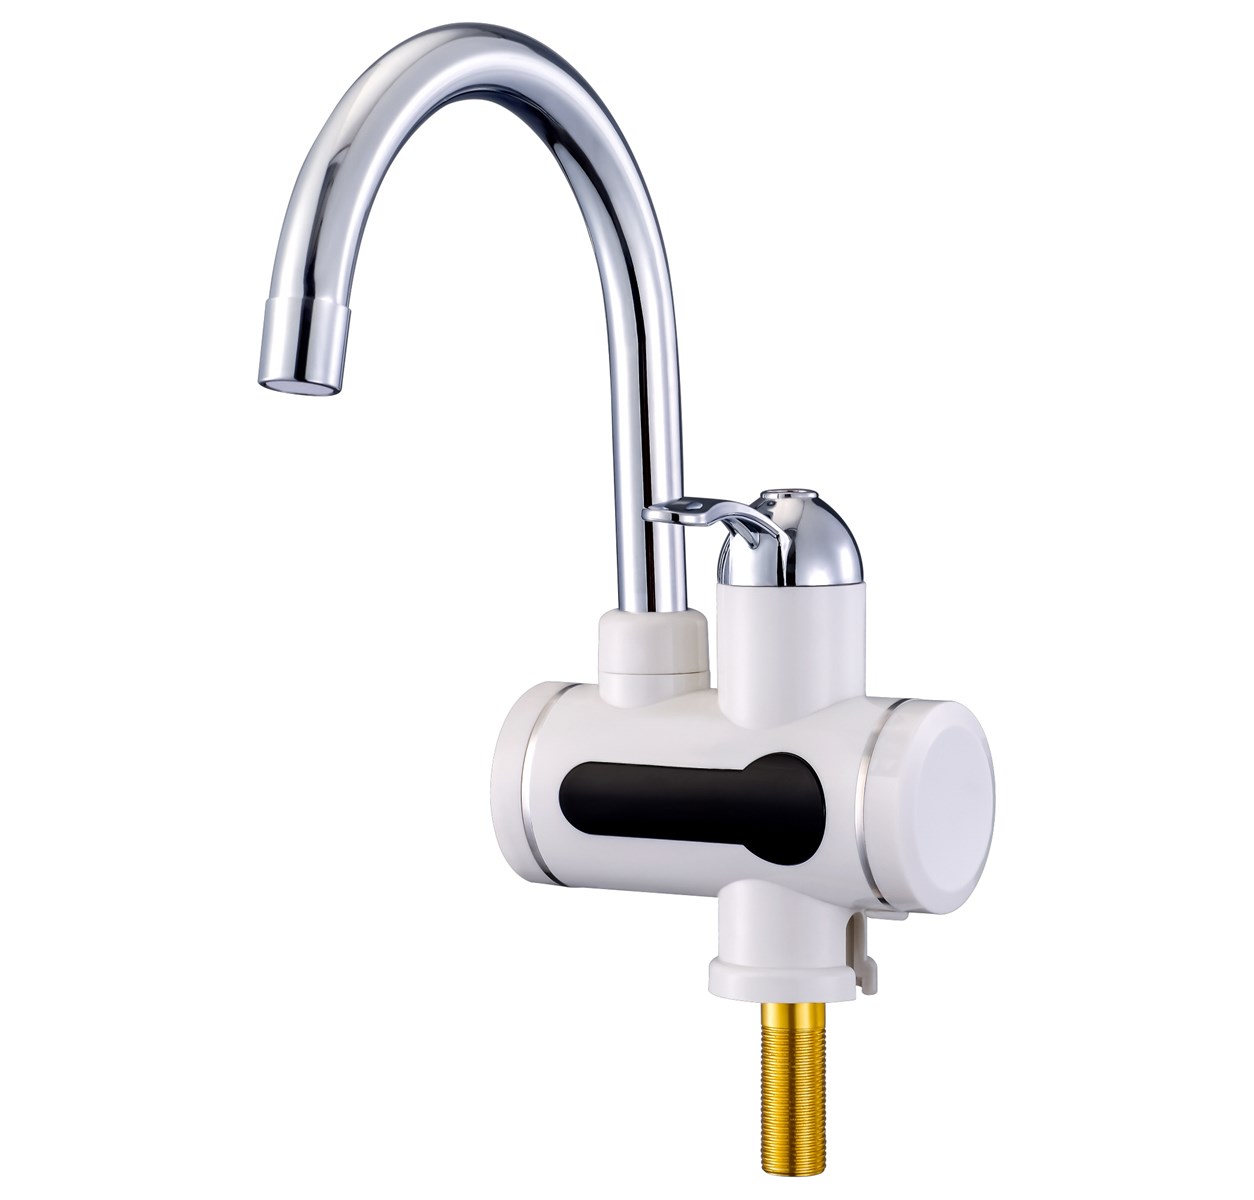 instant heating faucet with Digital display temperature